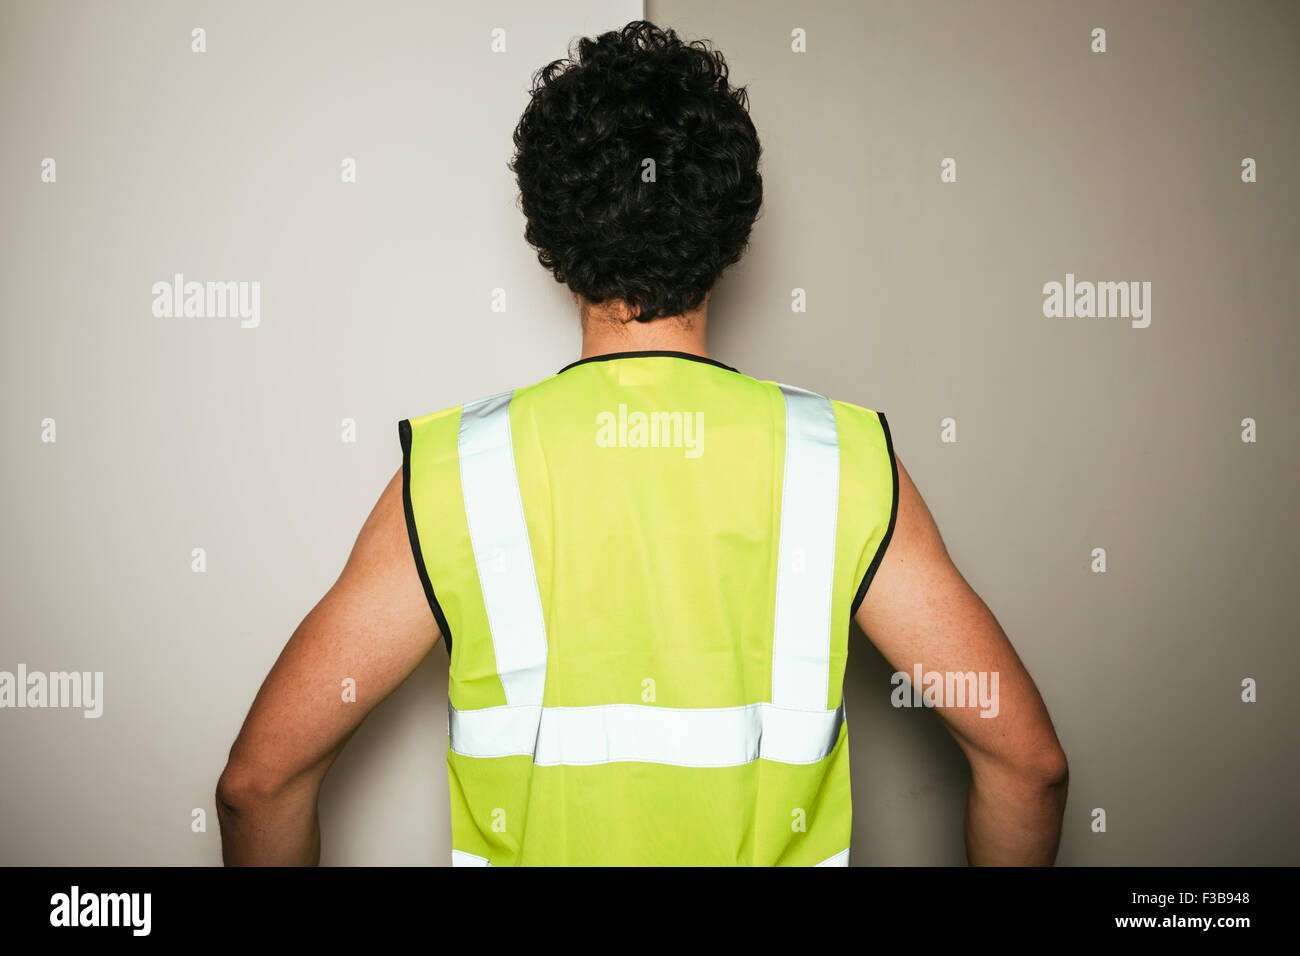 Rear view of a builder in a high visibility vest against a green and white background Stock Photo